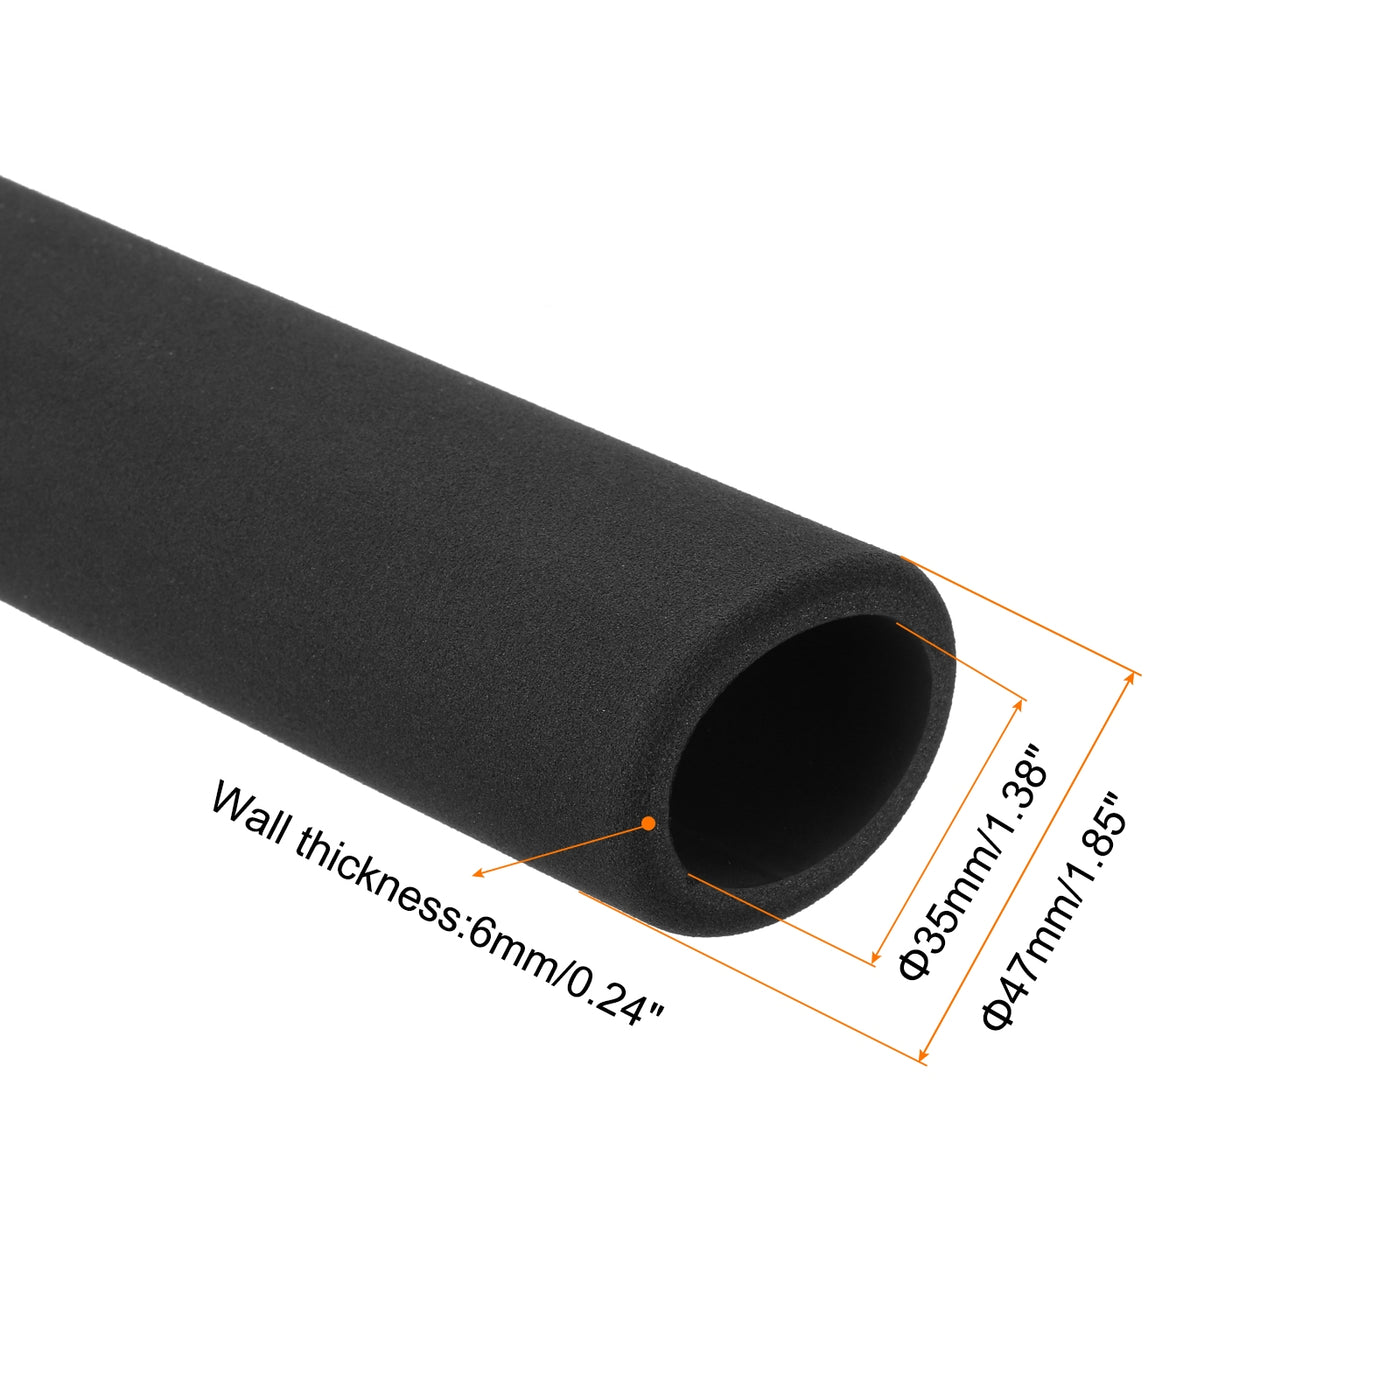 uxcell Uxcell Pipe Insulation Tube Foam Tubing for Handle Grip Support 35mm ID 47mm OD 395mm Heat Preservation Black